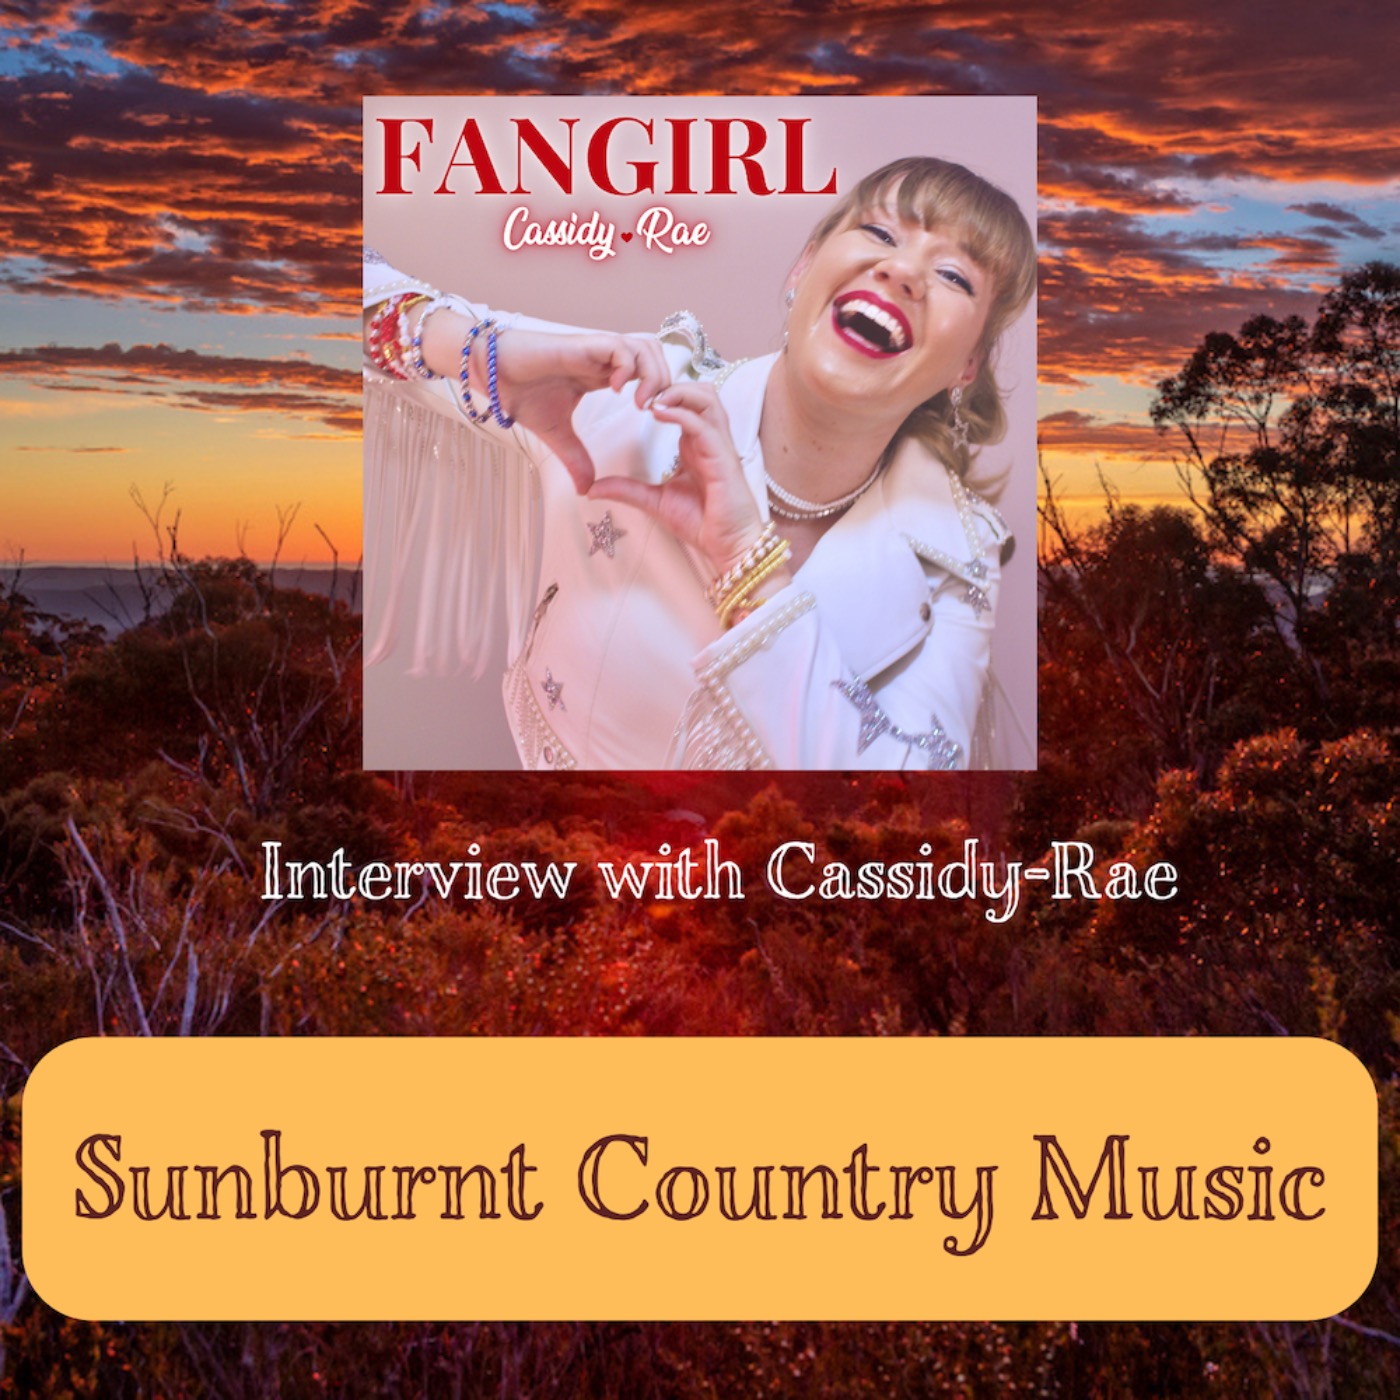 cover art for Cassidy-Rae on 'Fangirl', fangirling and four-hour shows